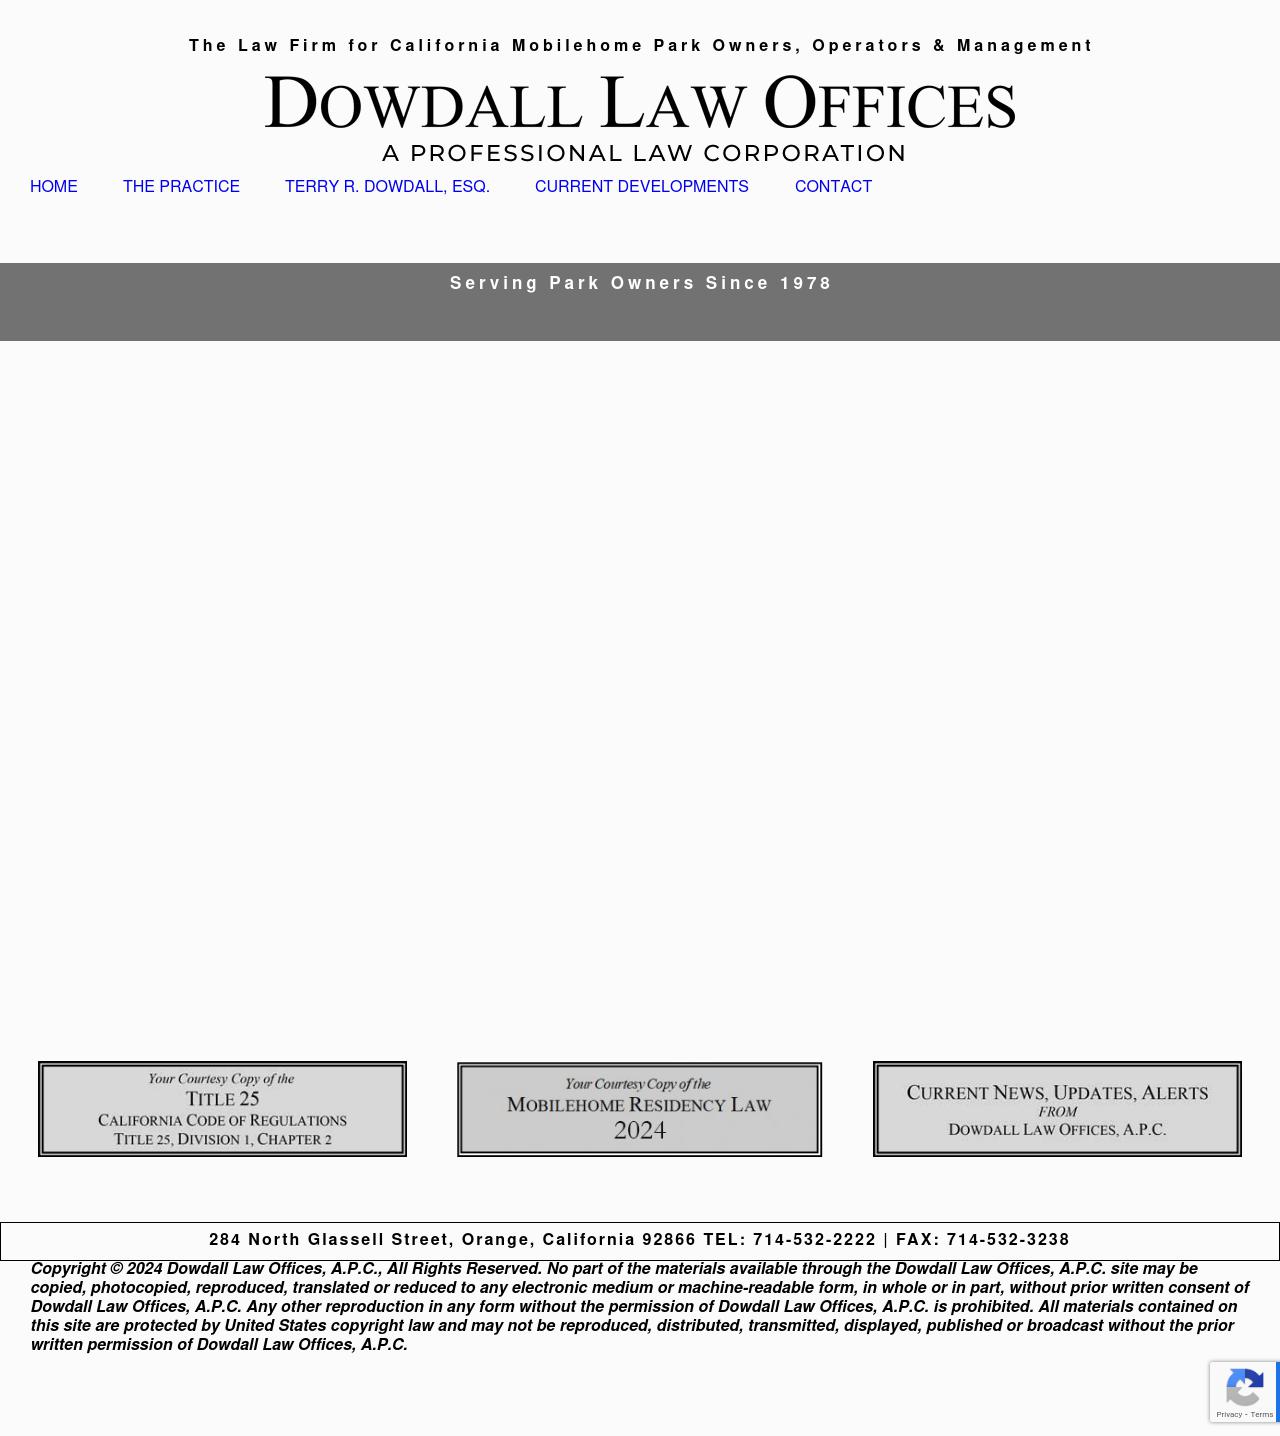 Dowdall Law Offices, A.P.C. - Sacramento CA Lawyers